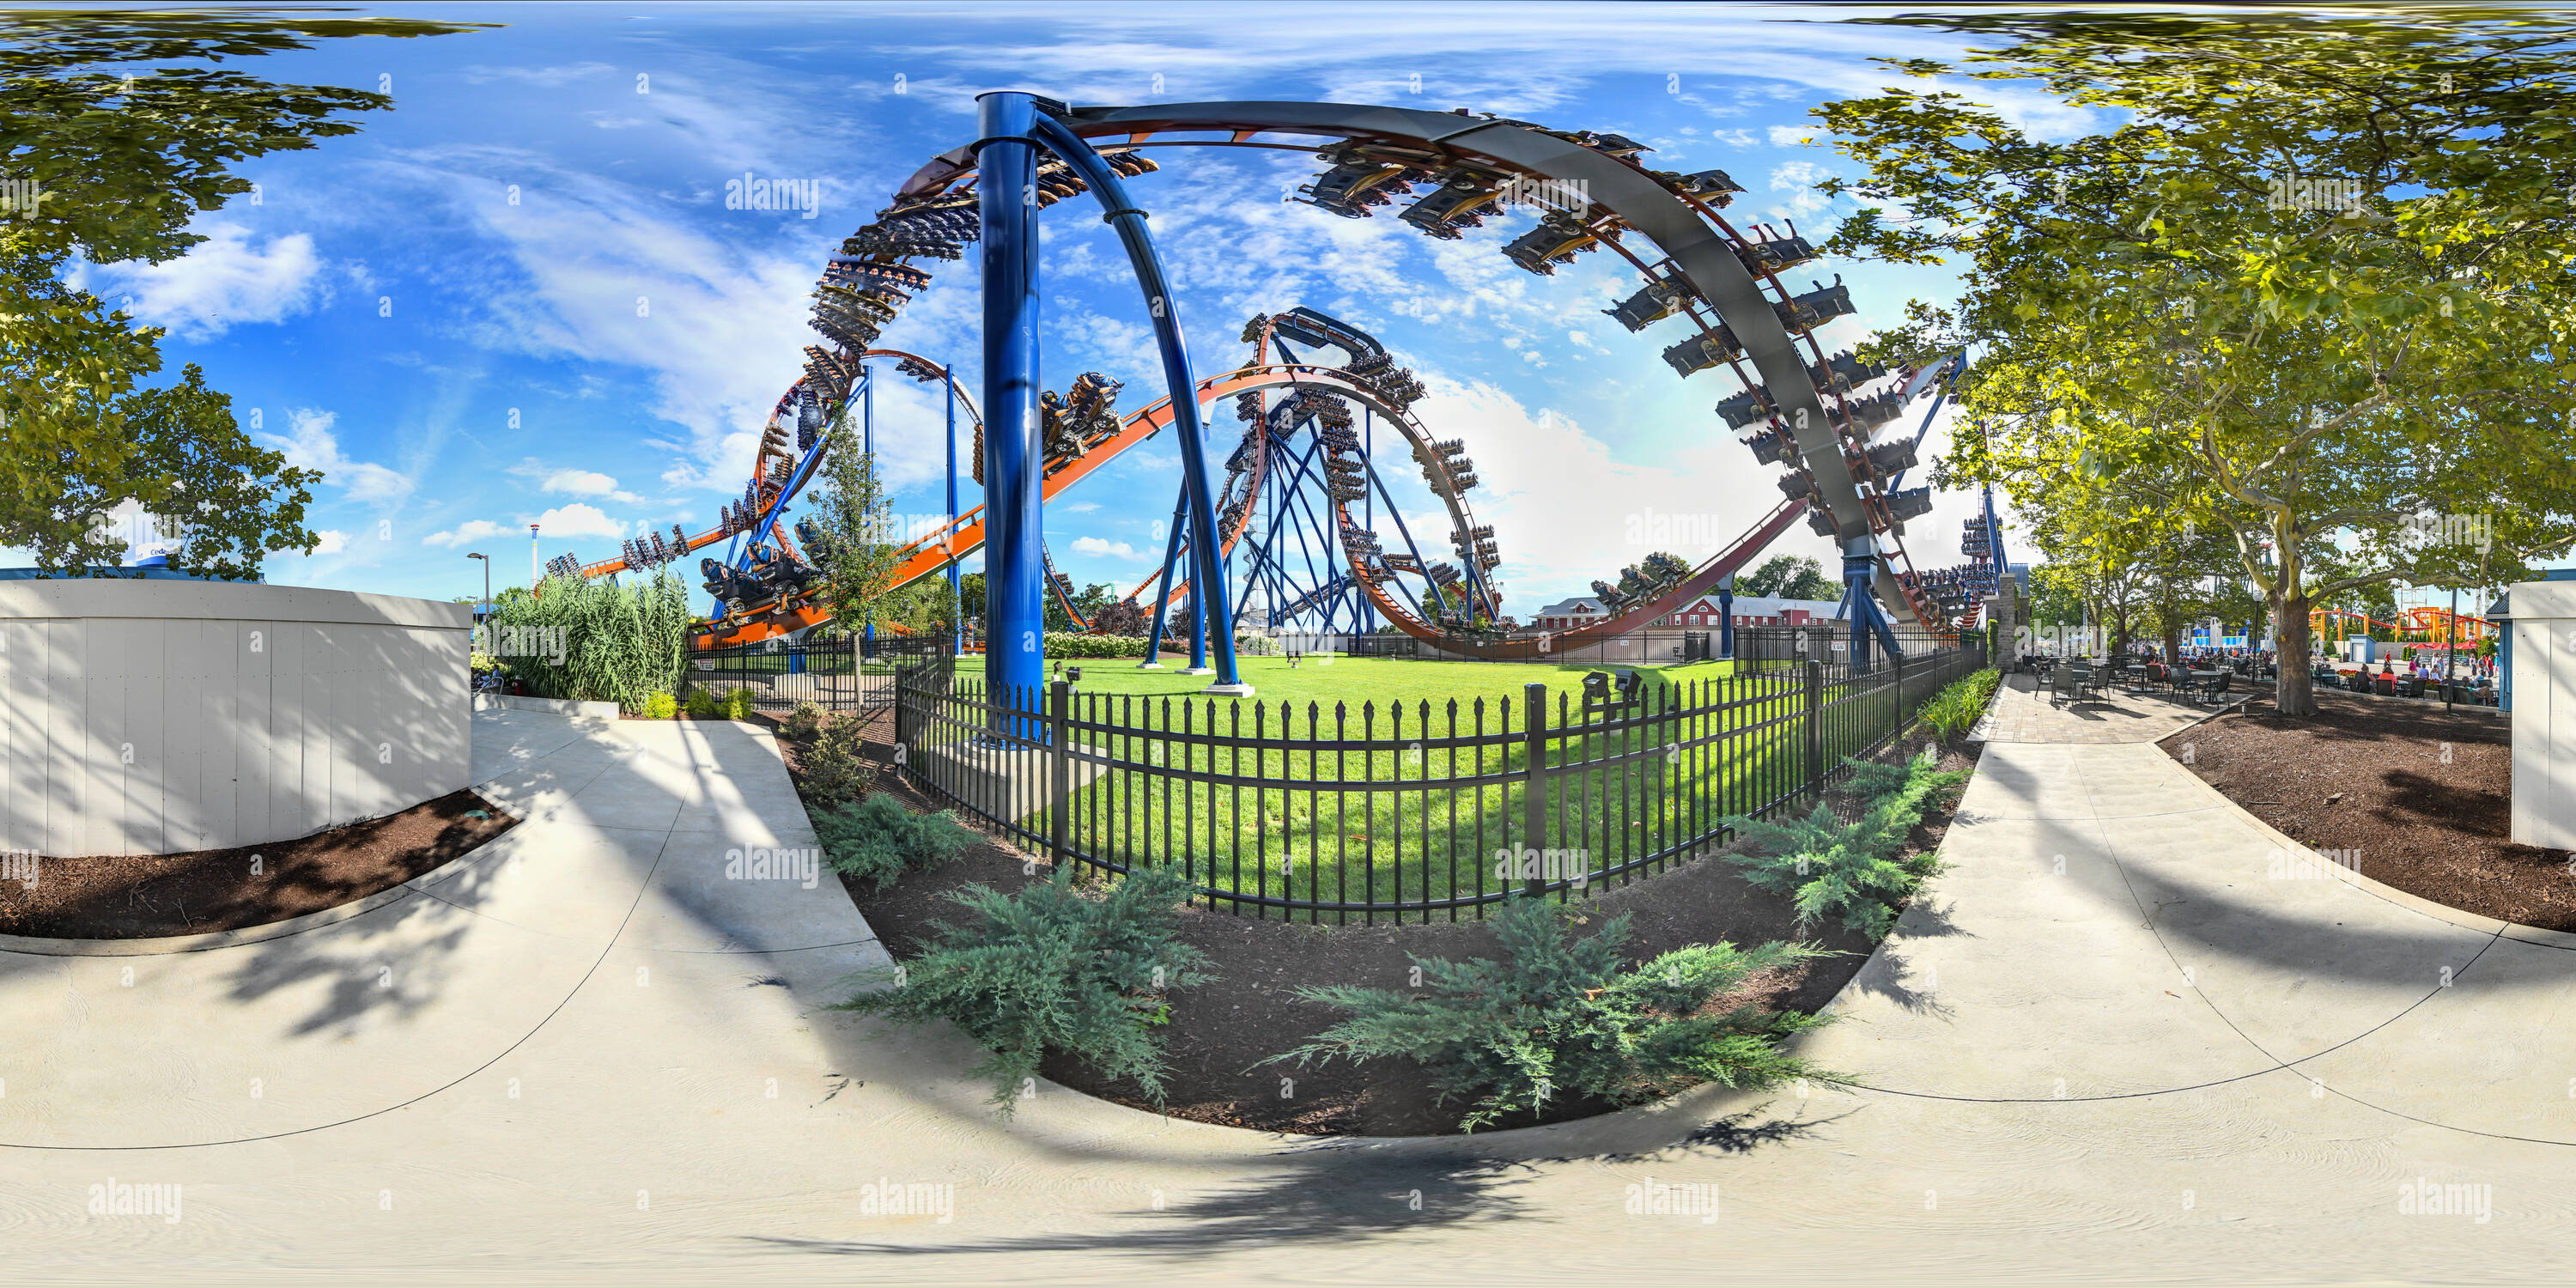 360 degree panoramic view of Valravn at Cedar Point